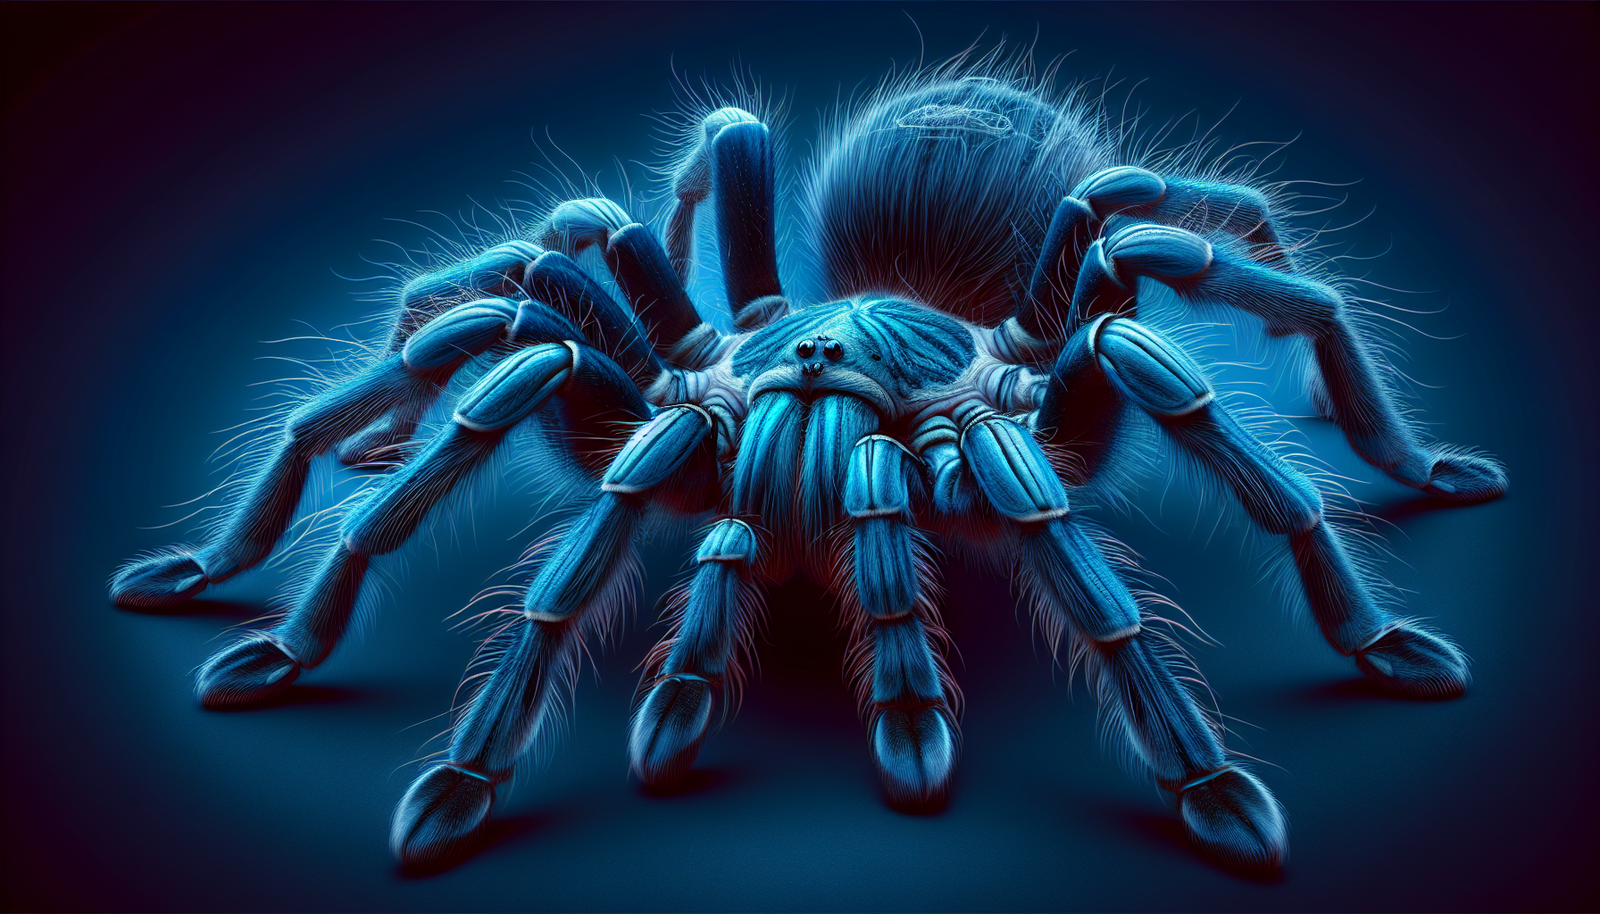 What Is The Temperament Of The Rare And Sought-after Brazilian Blue Tarantula?